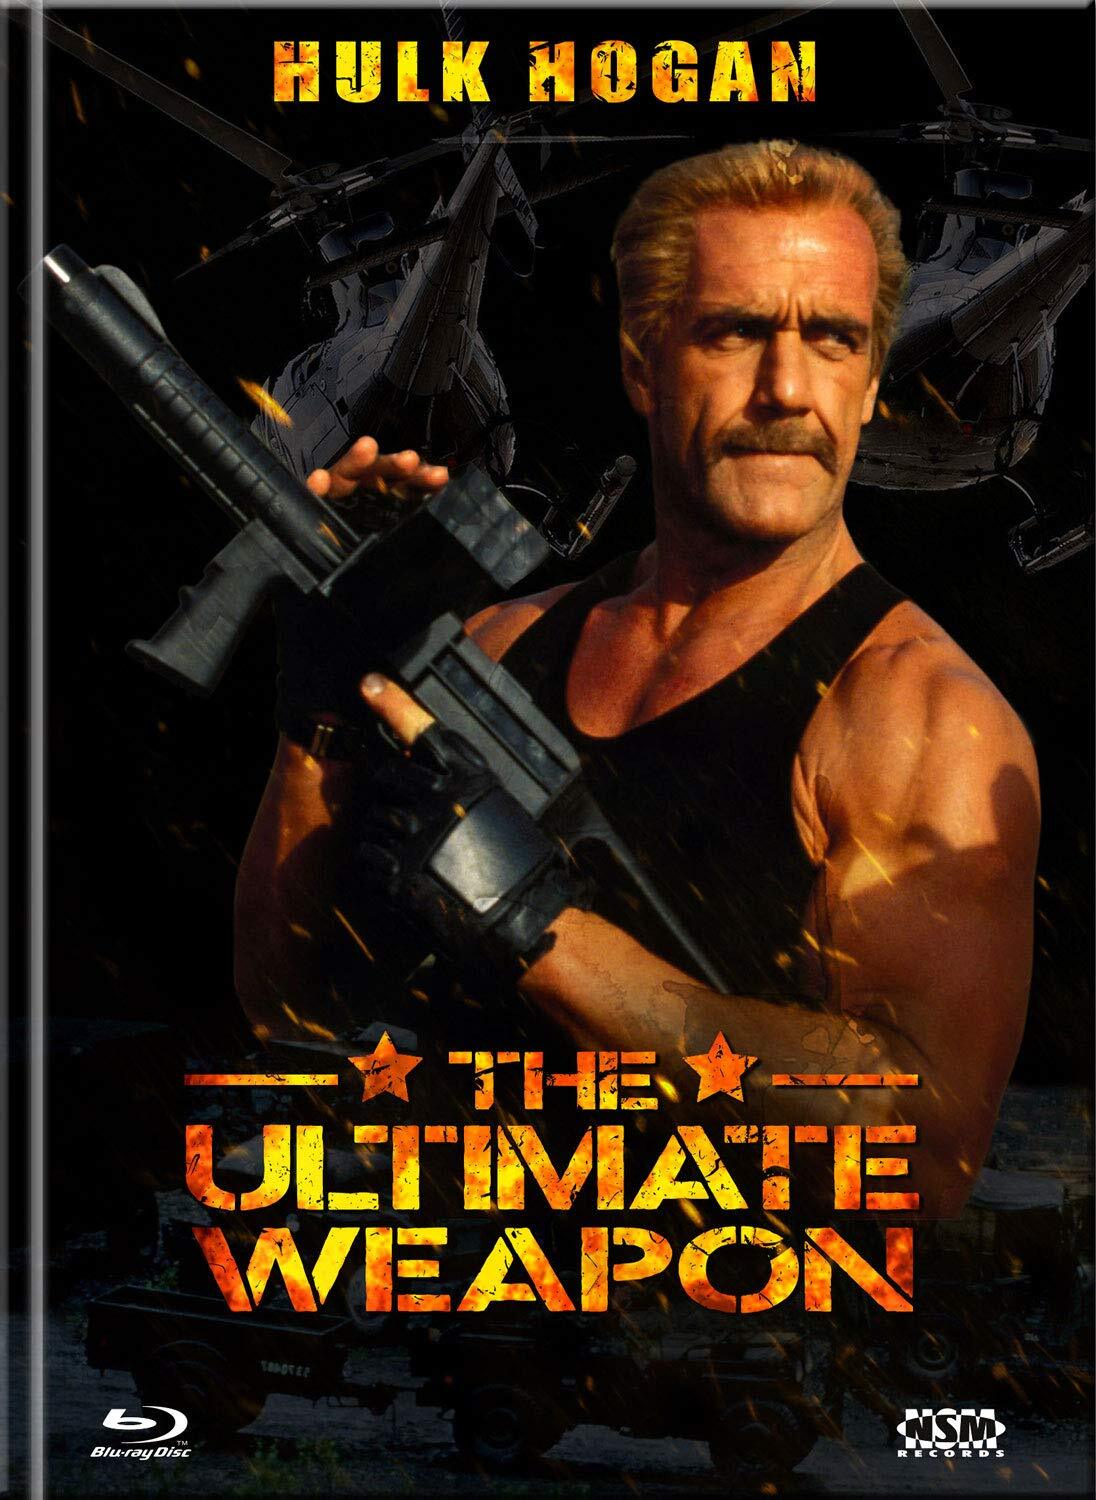 Movie The Podcast : The Ultimate weapon